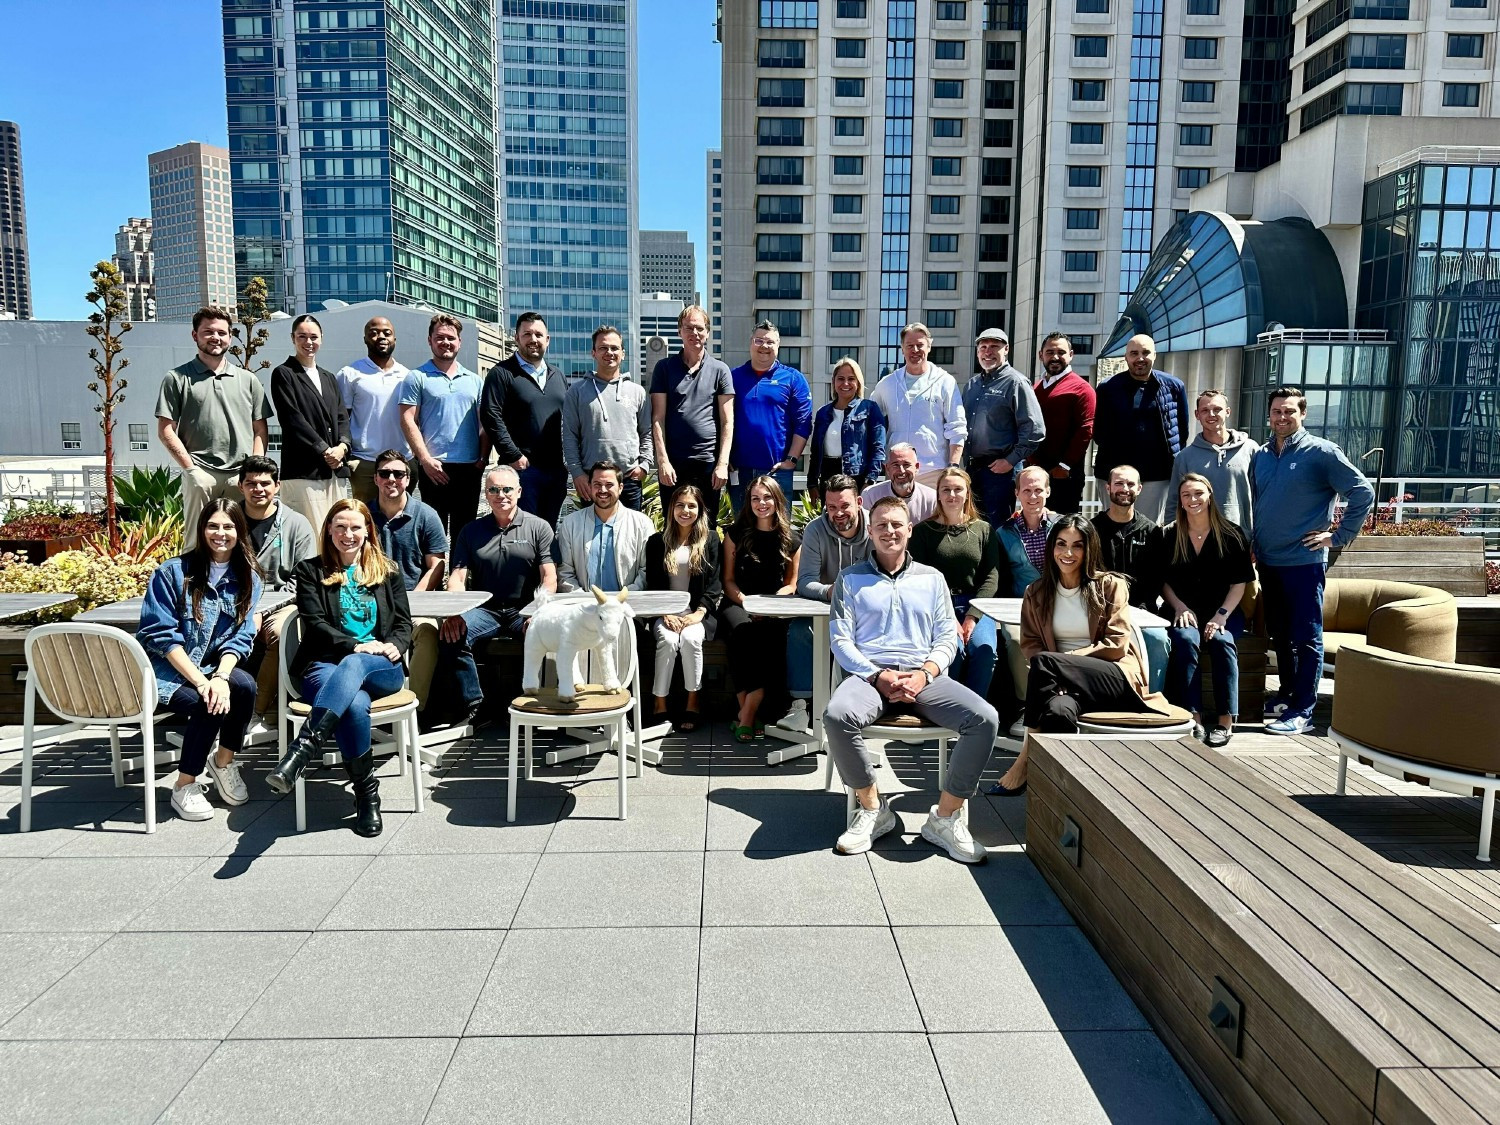 Cribl team members enjoy a beautiful day at the San Francisco office.